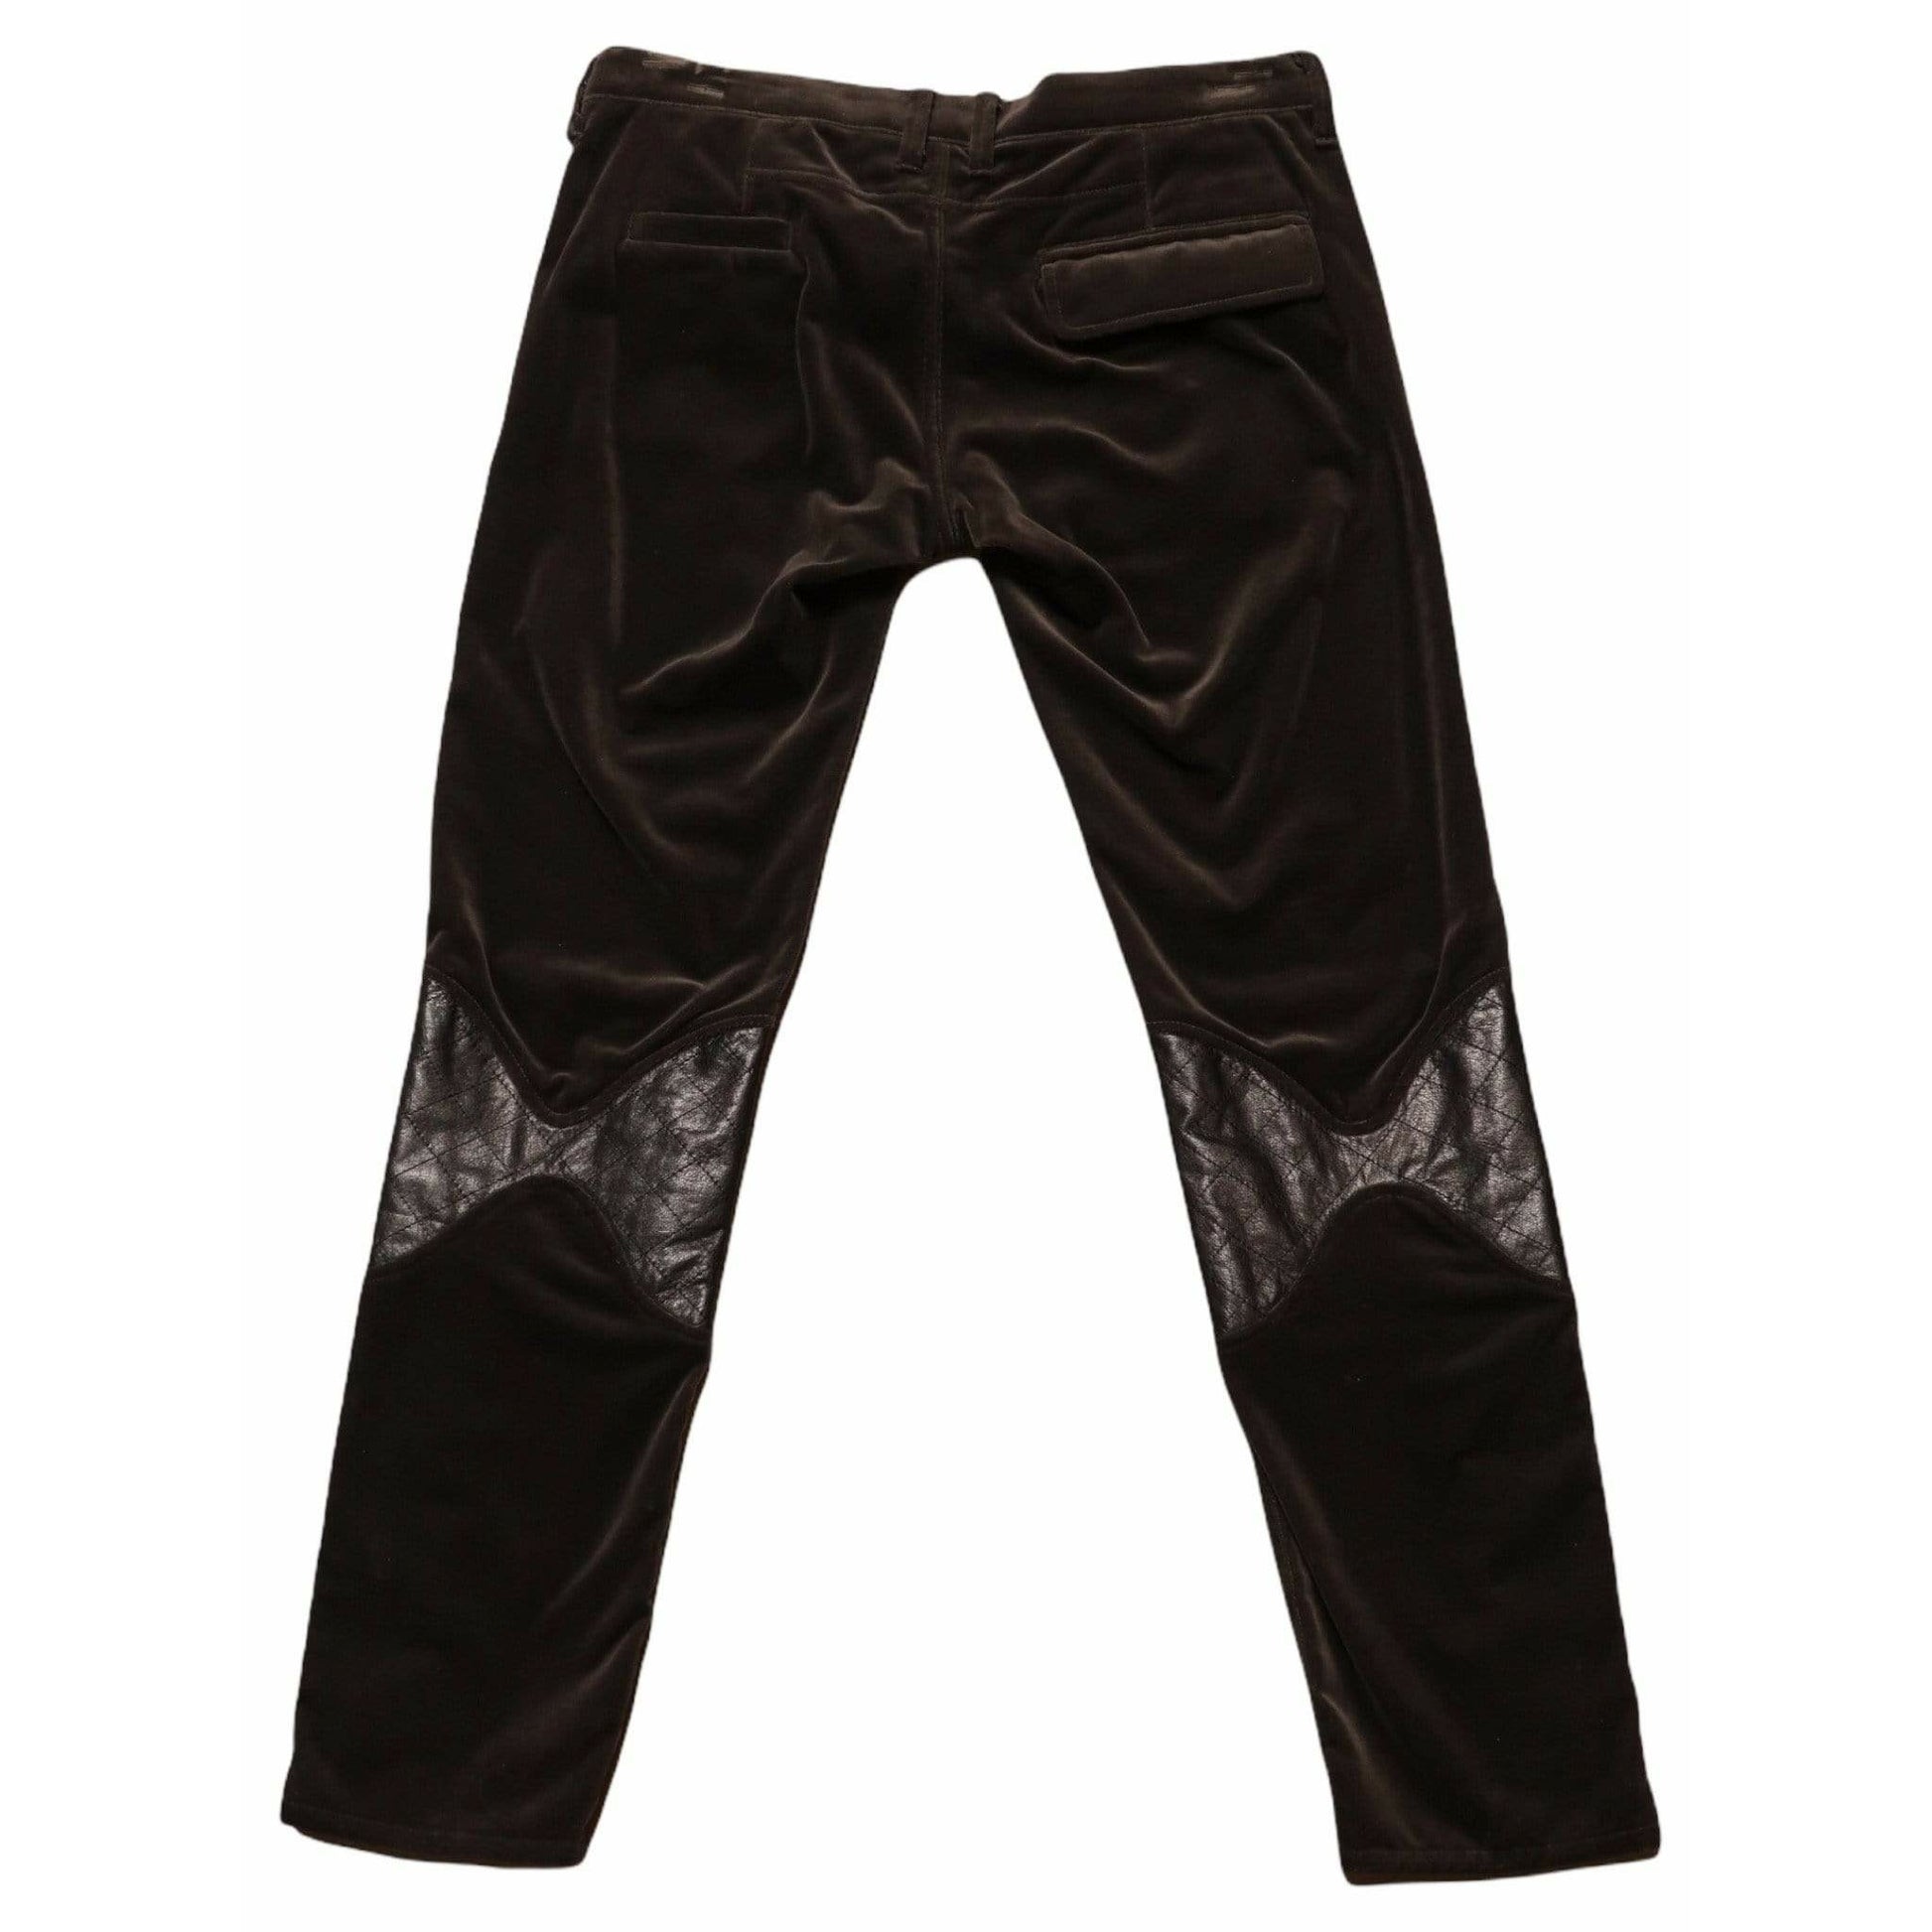 Pants undercover-charcoal-straight-pant Black